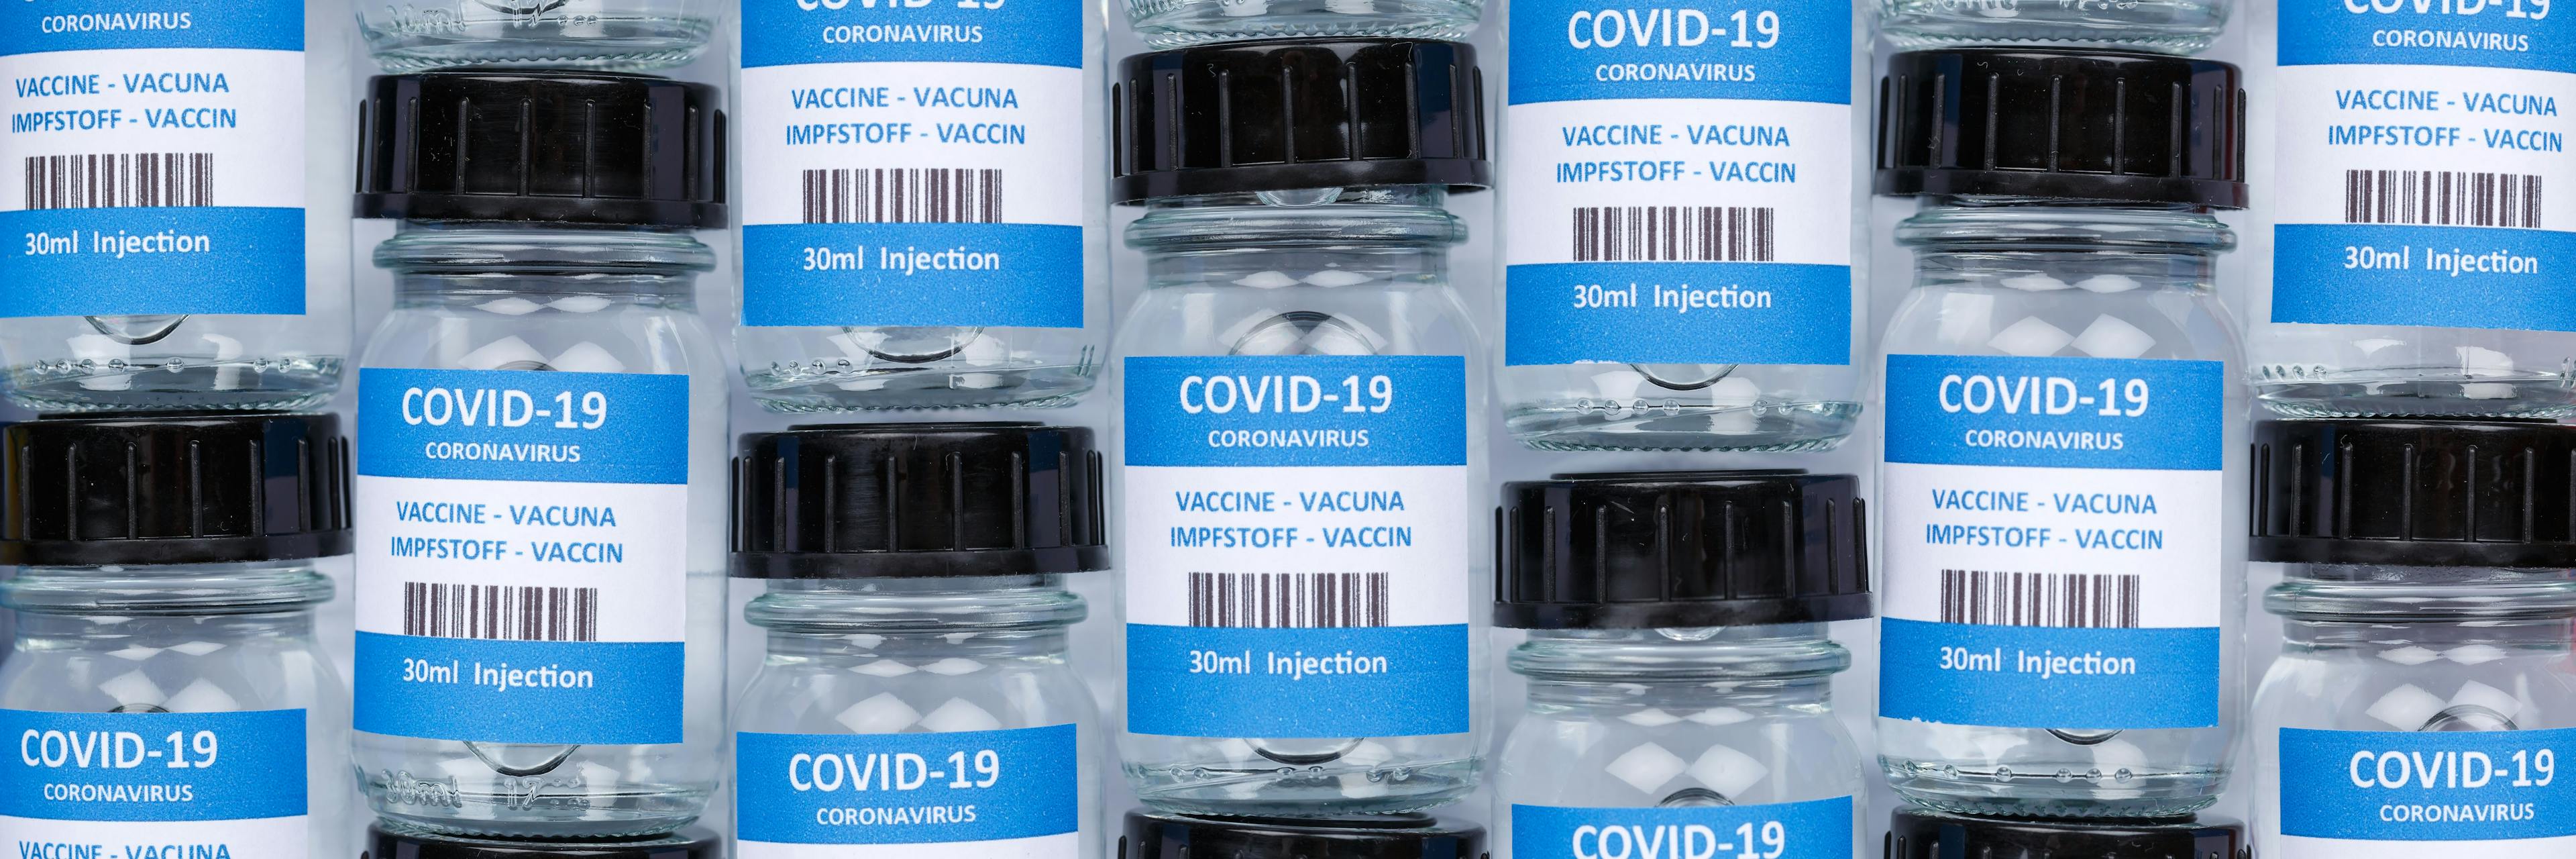 Novavax begins rolling review of COVID-19 vaccine candidate